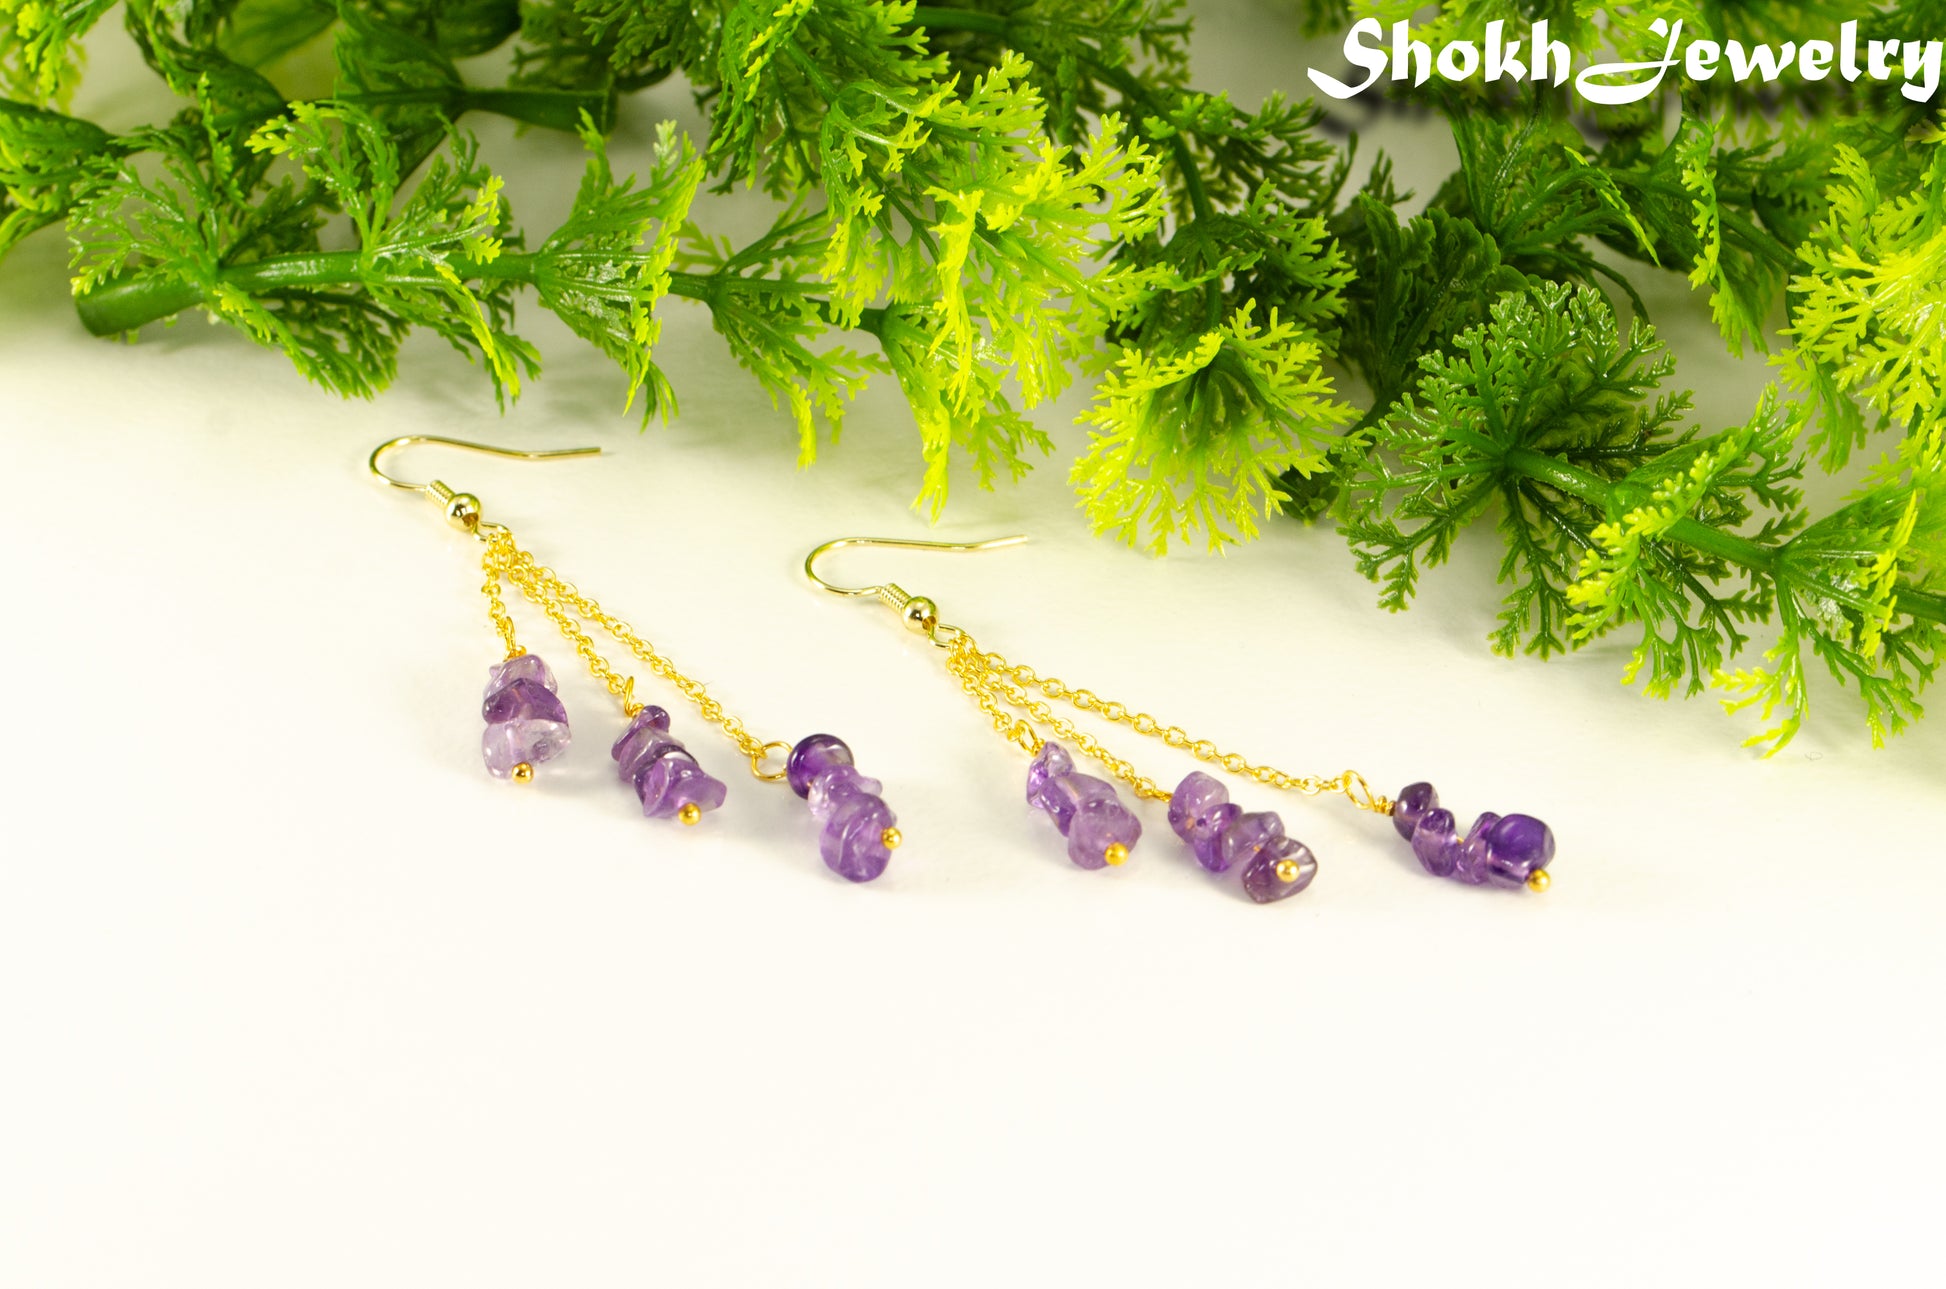 Long Gold Plated Chain and Amethyst Crystal Chip Earrings for women.